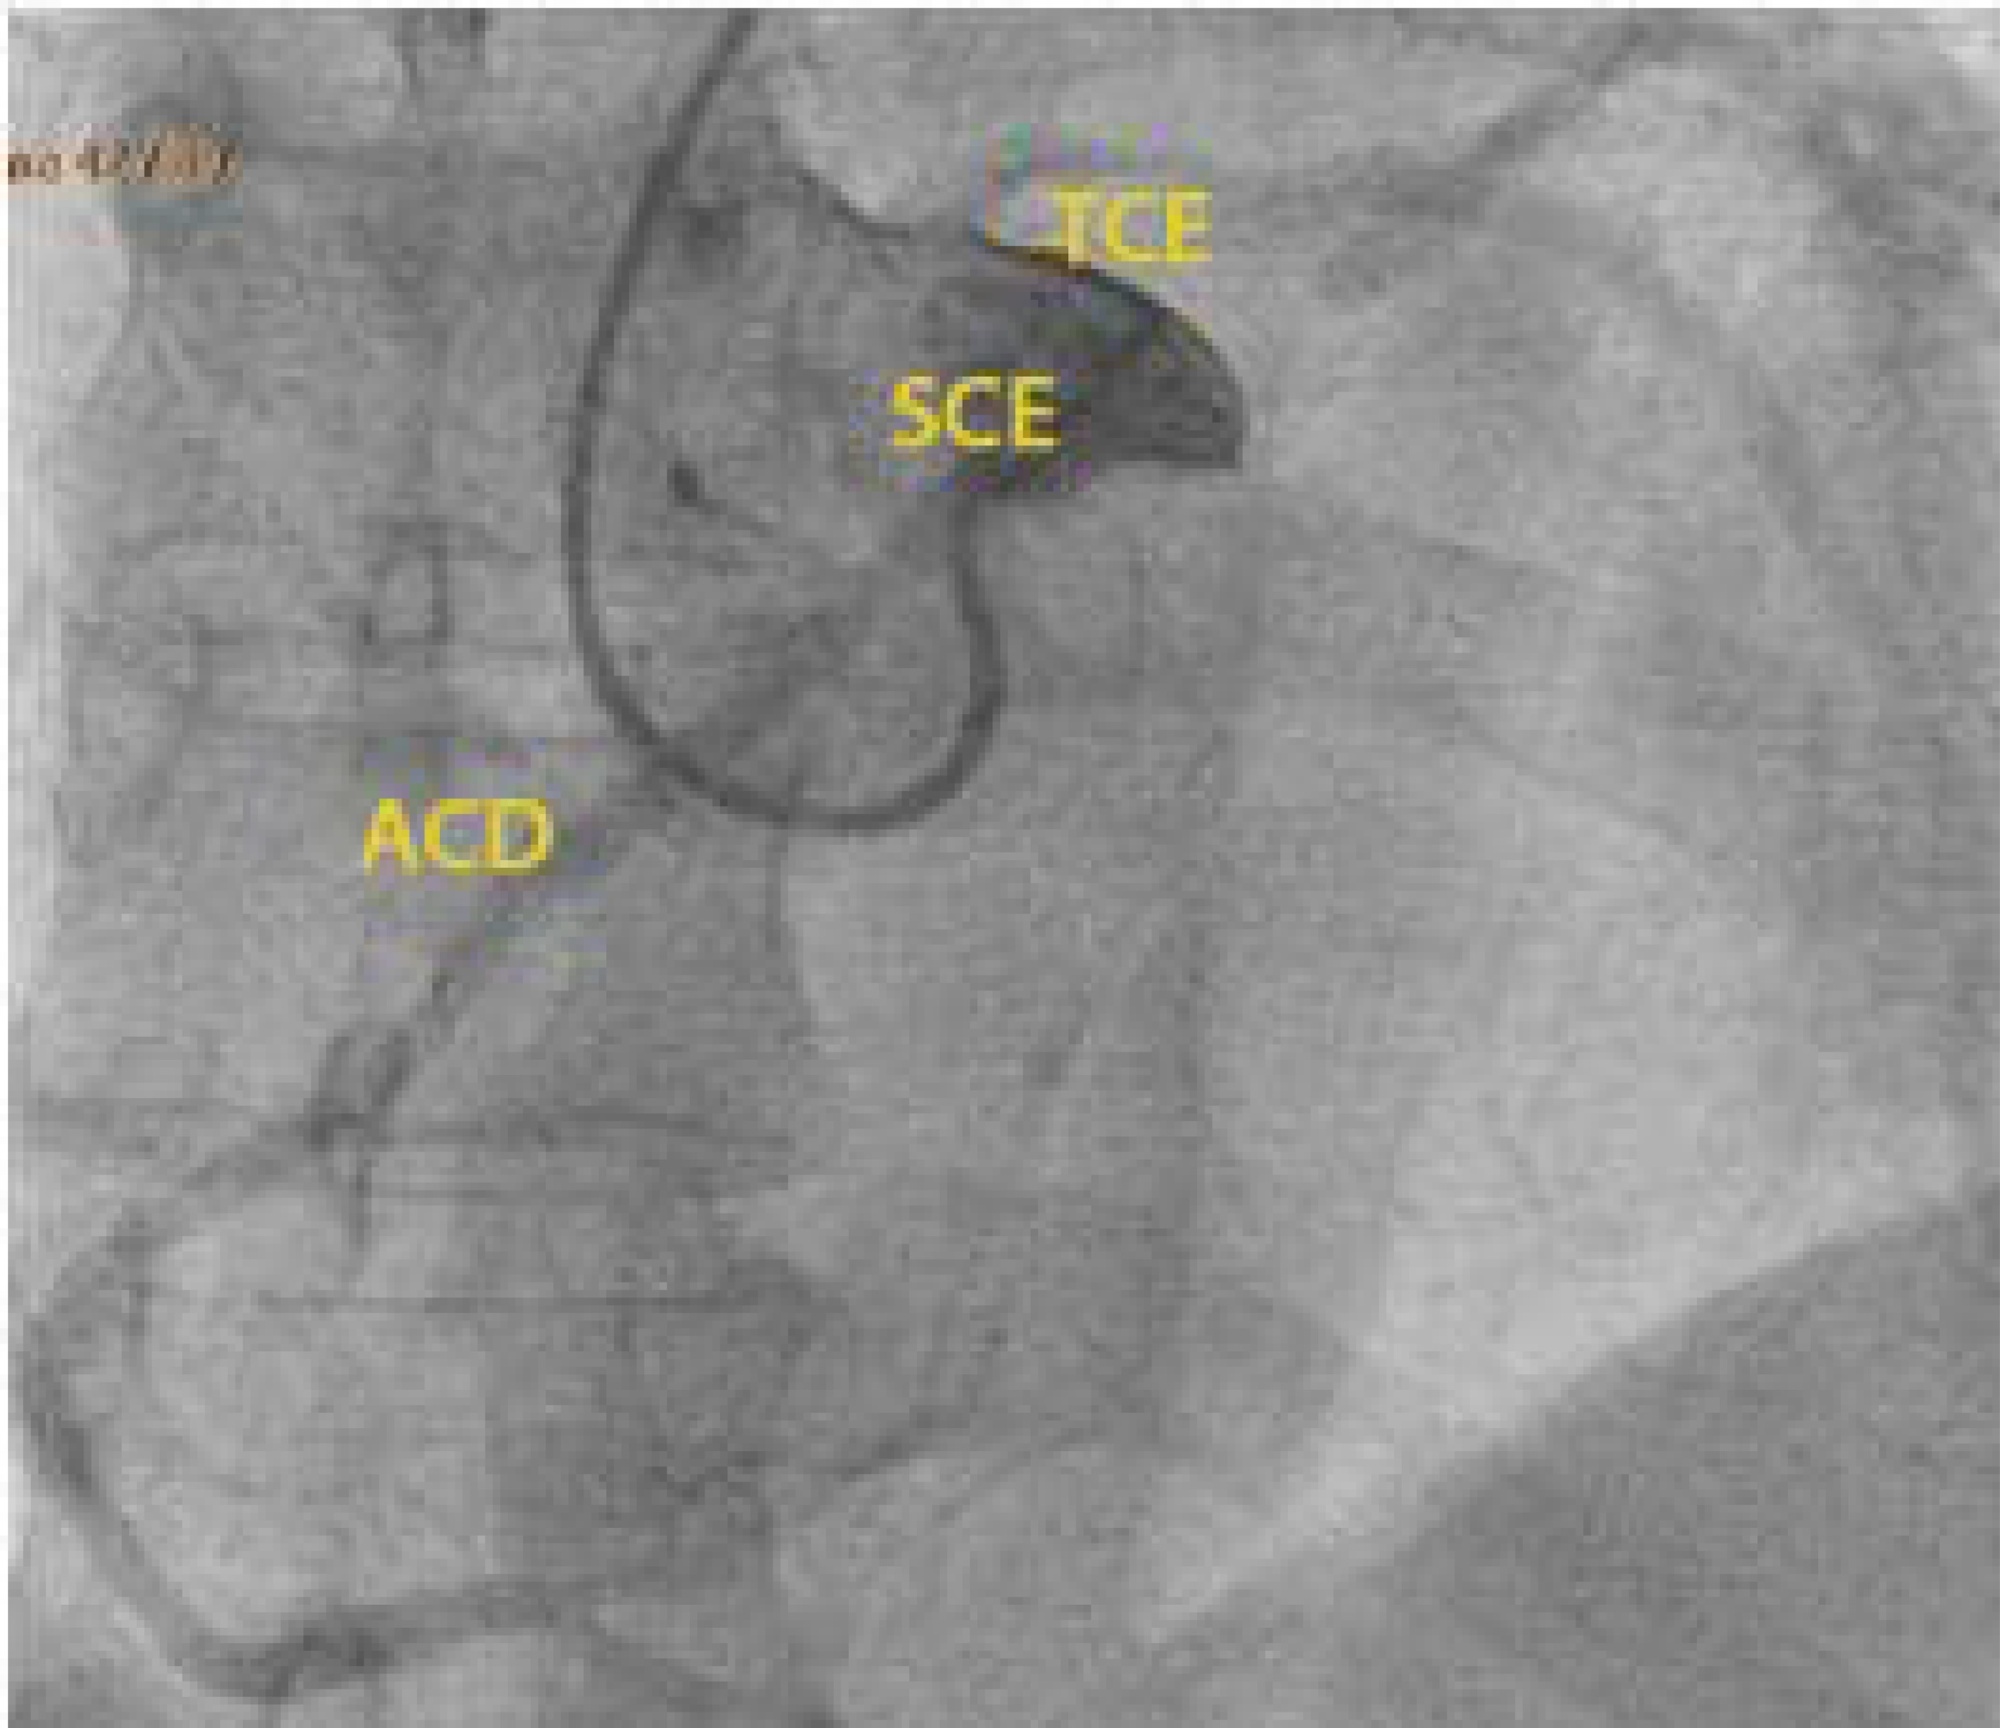 Cardiac arrest due to an anomalous aortic origin of a coronary artery: are older patients really safe?